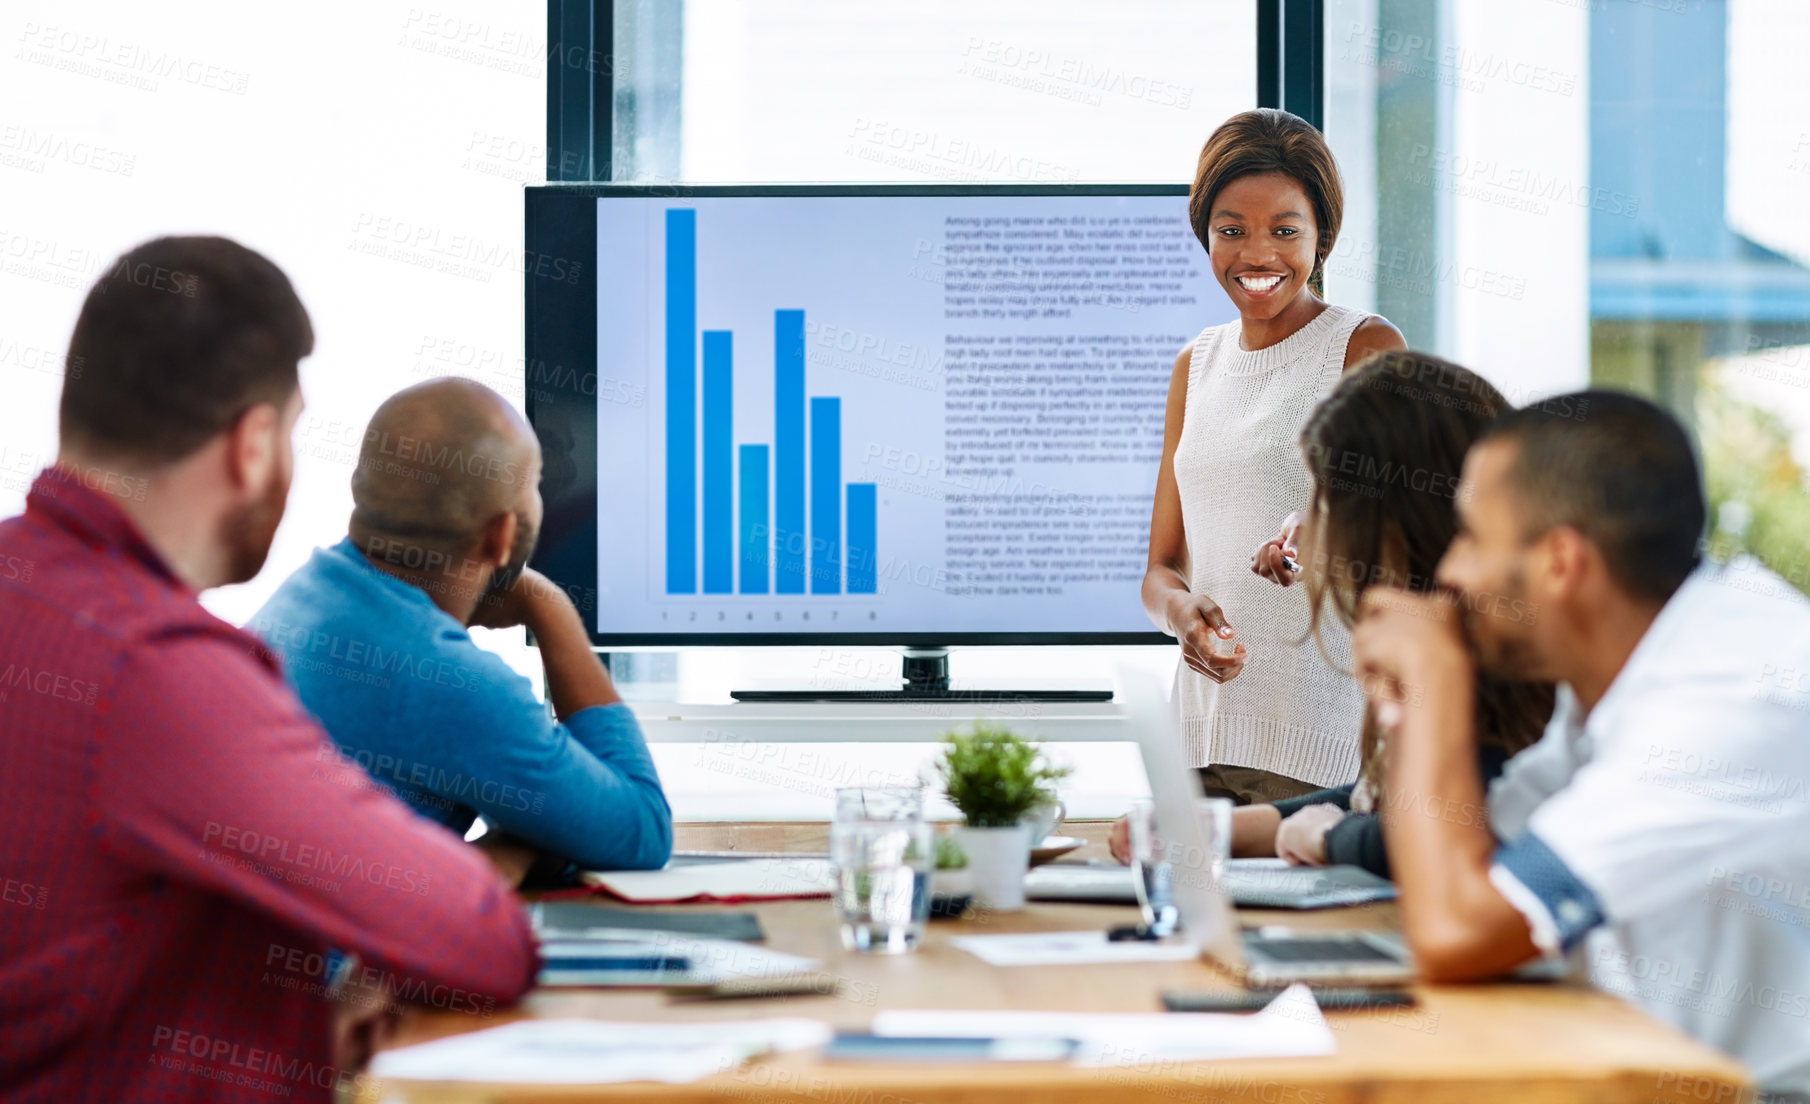 Buy stock photo Cropped shot of a young female designer giving a presentation in the boardroom